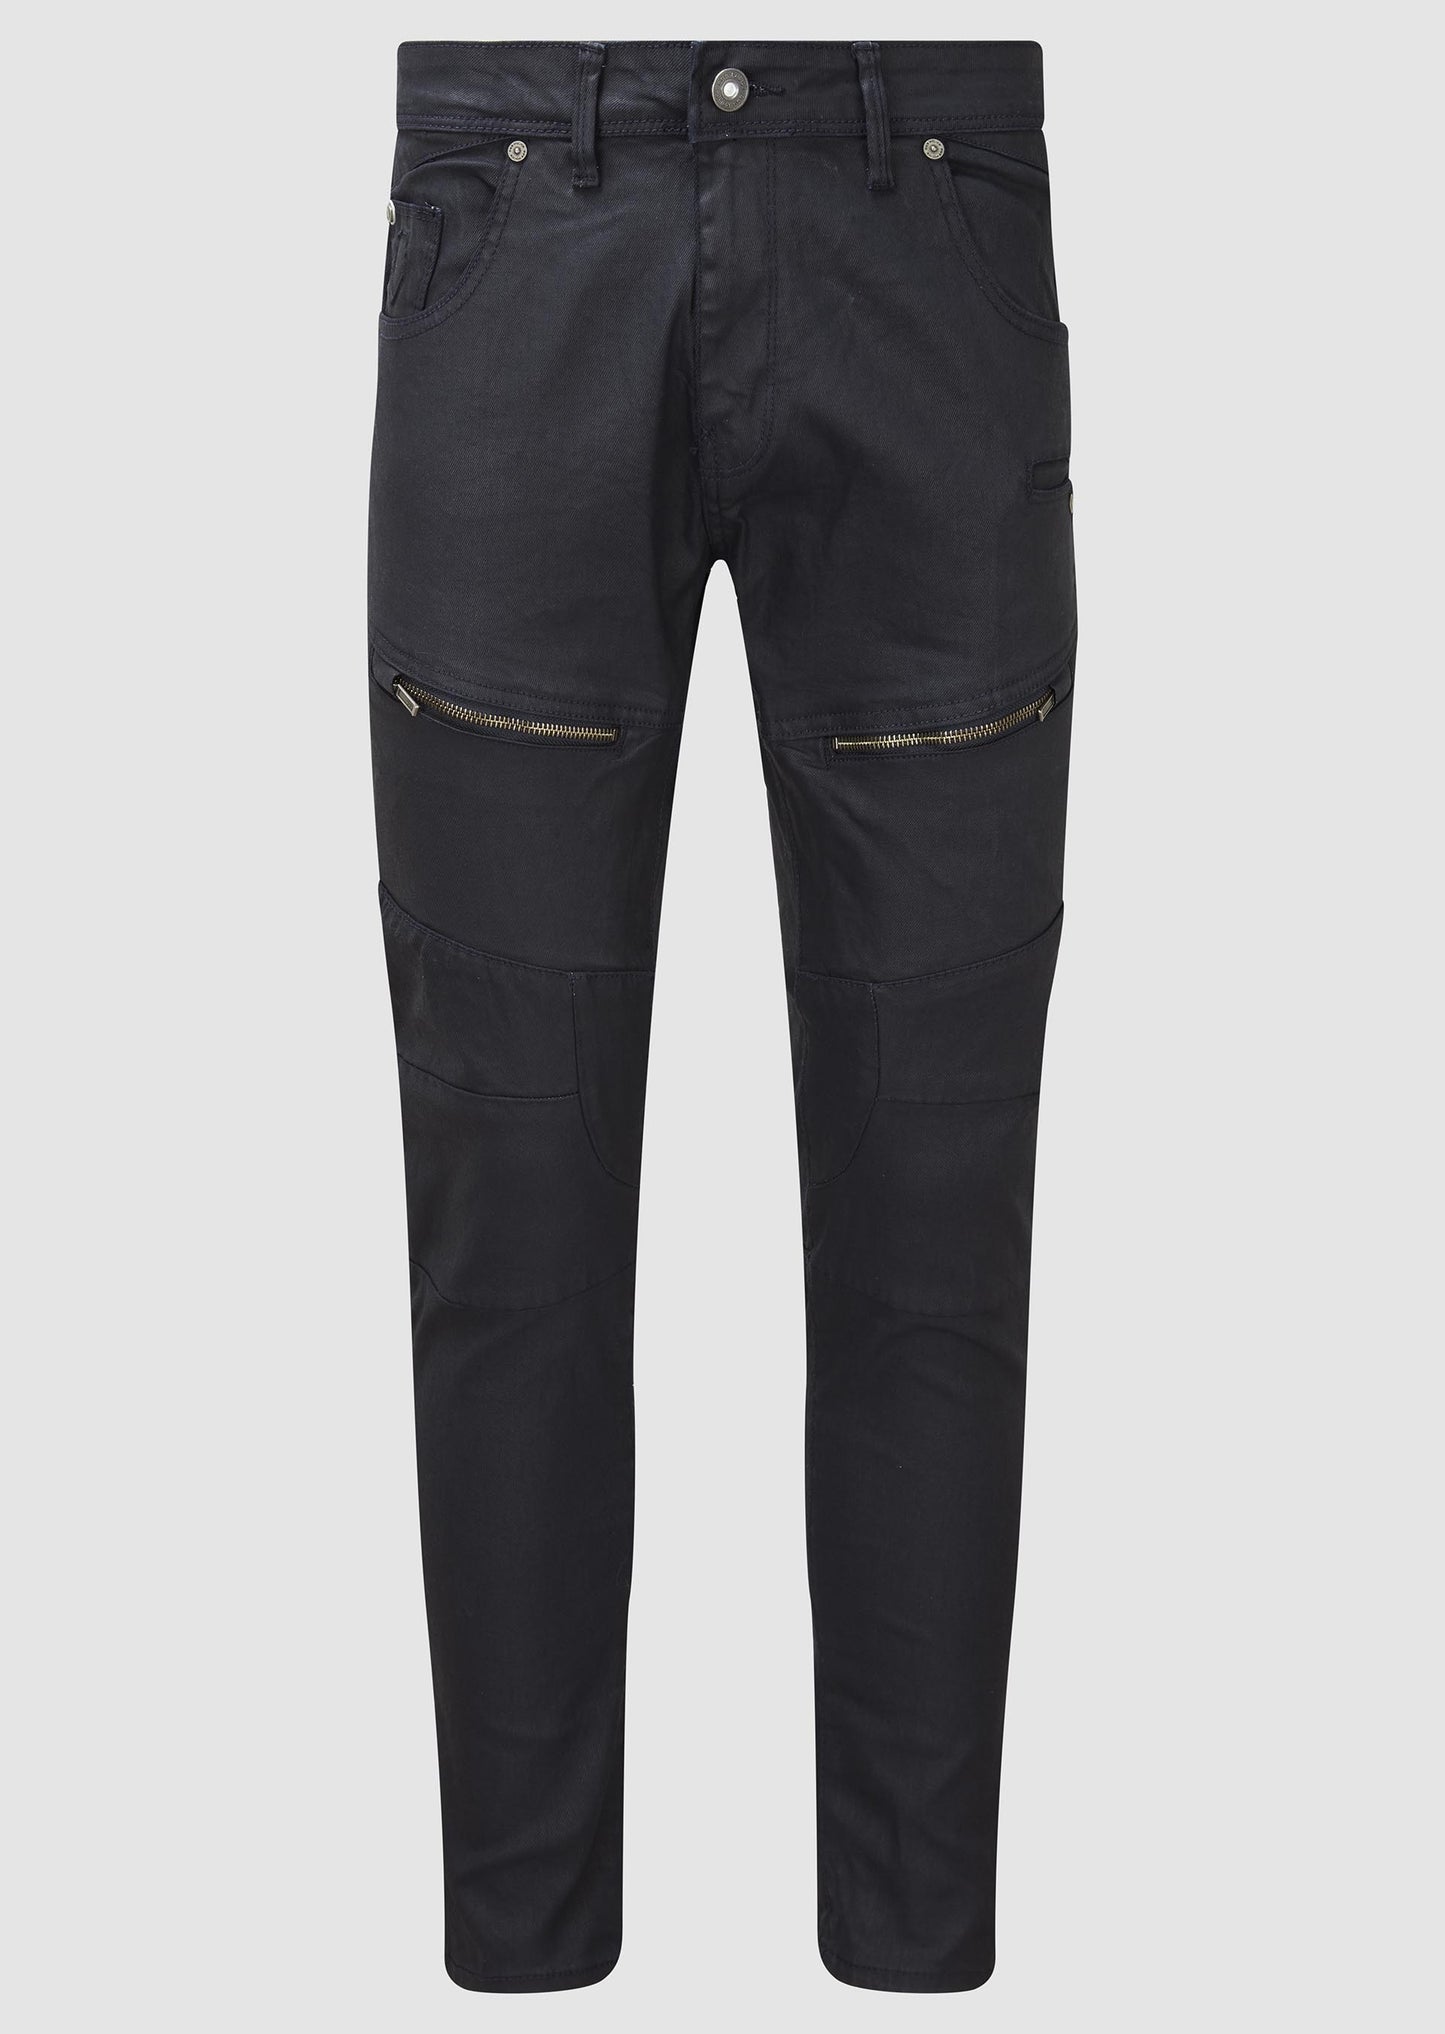 Moriarty NOX 388 Slim Fit Jeans